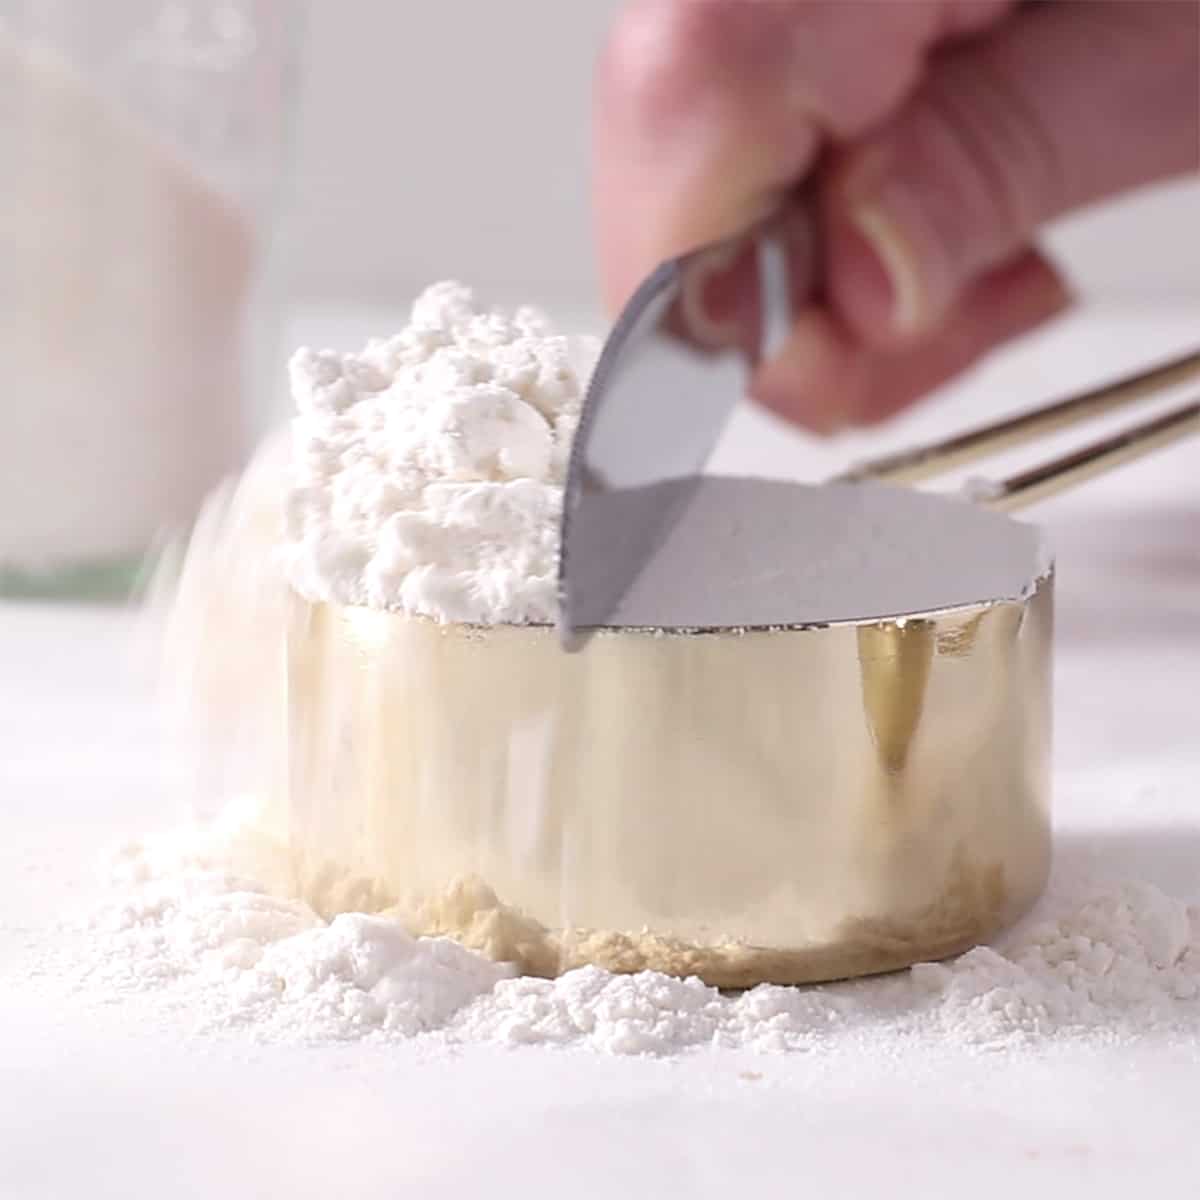 a knife is used to level off the flour in a measuring cup.